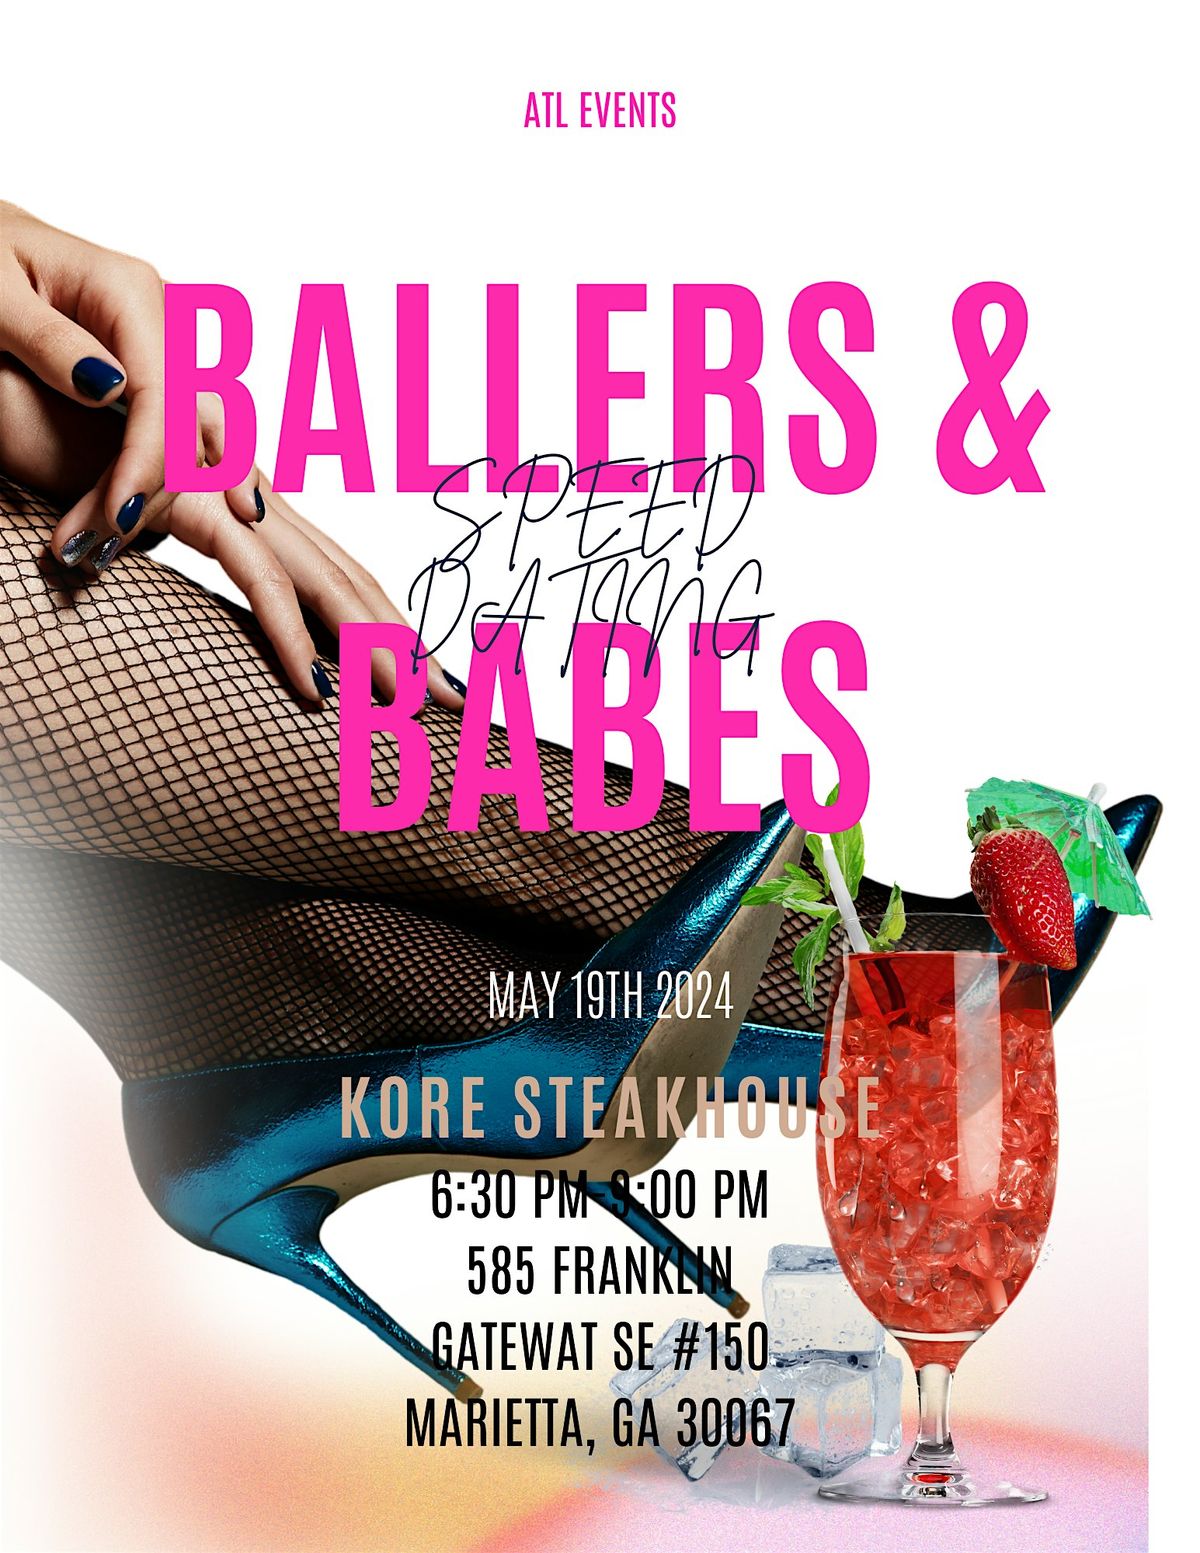 ATL EVENTS PRESENTS SPEED DATING EVENT: BALLERS & BABES EDITION